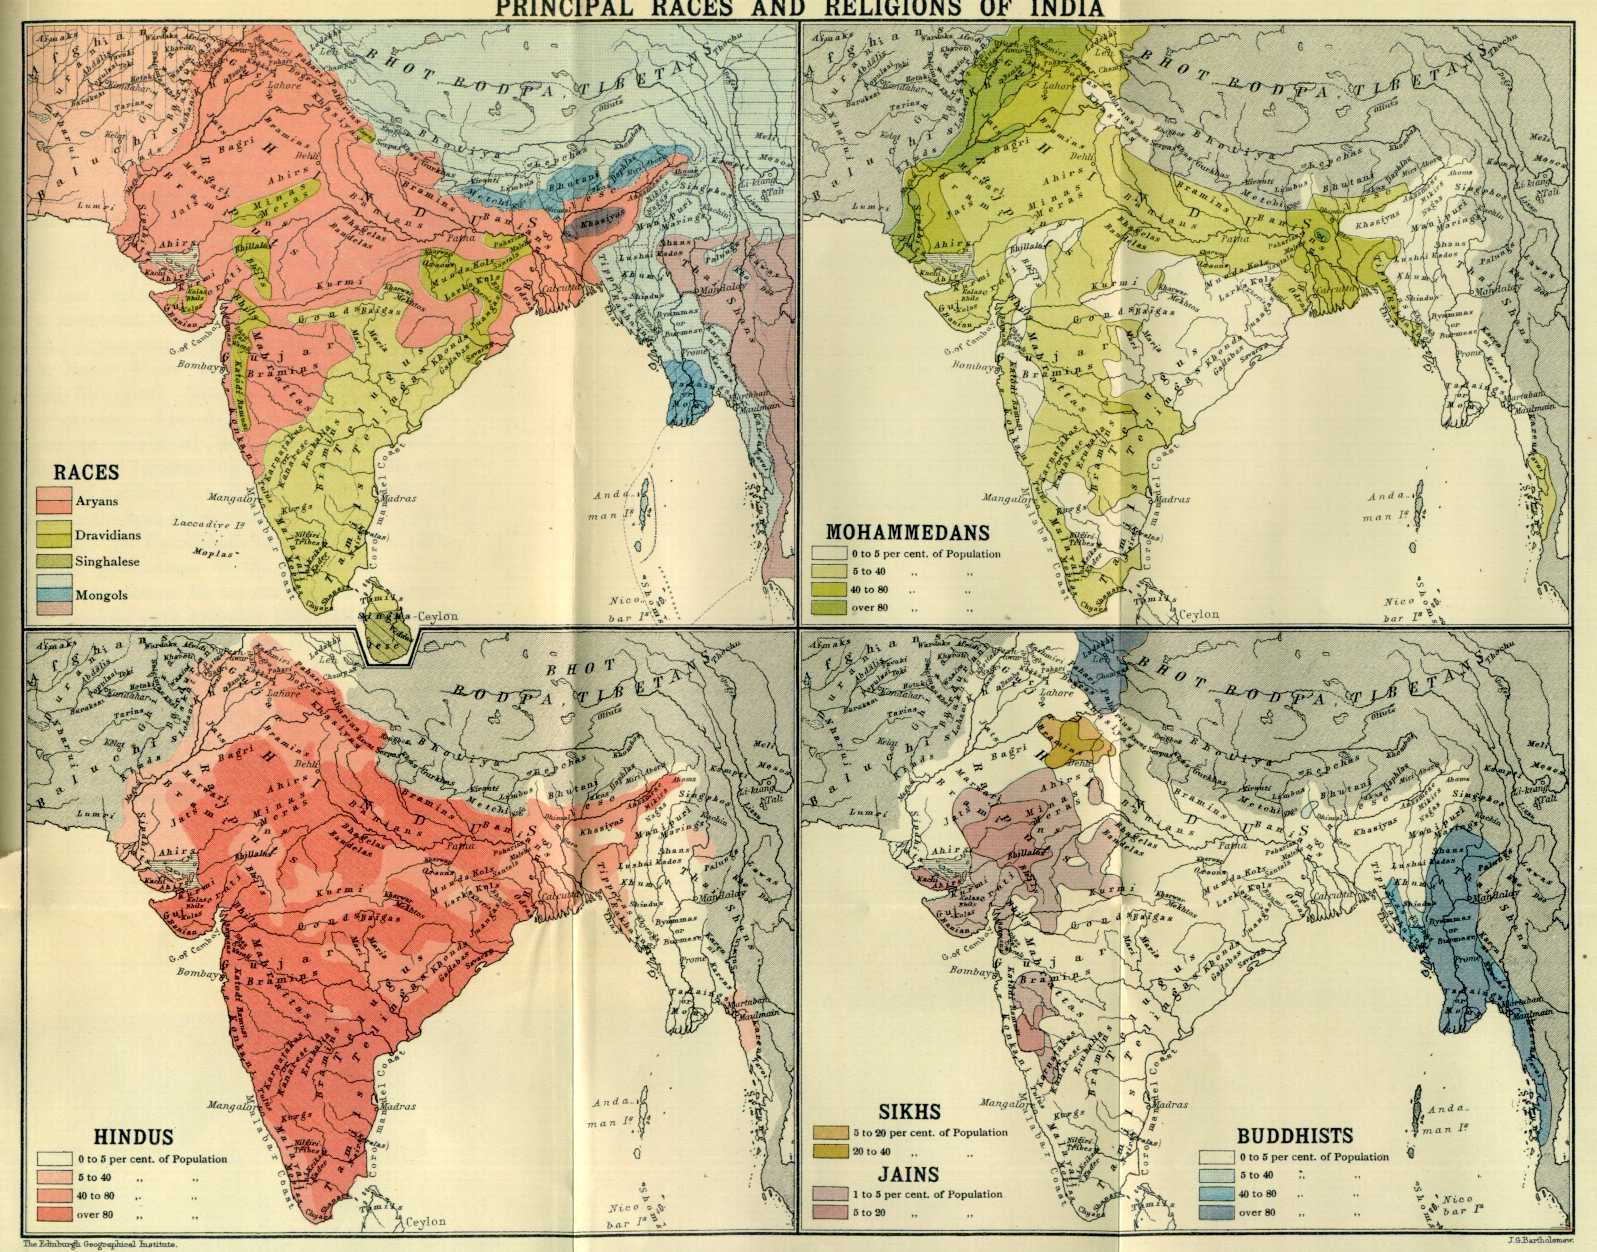 British view of race and religion in their Indian Empire c. 1901.